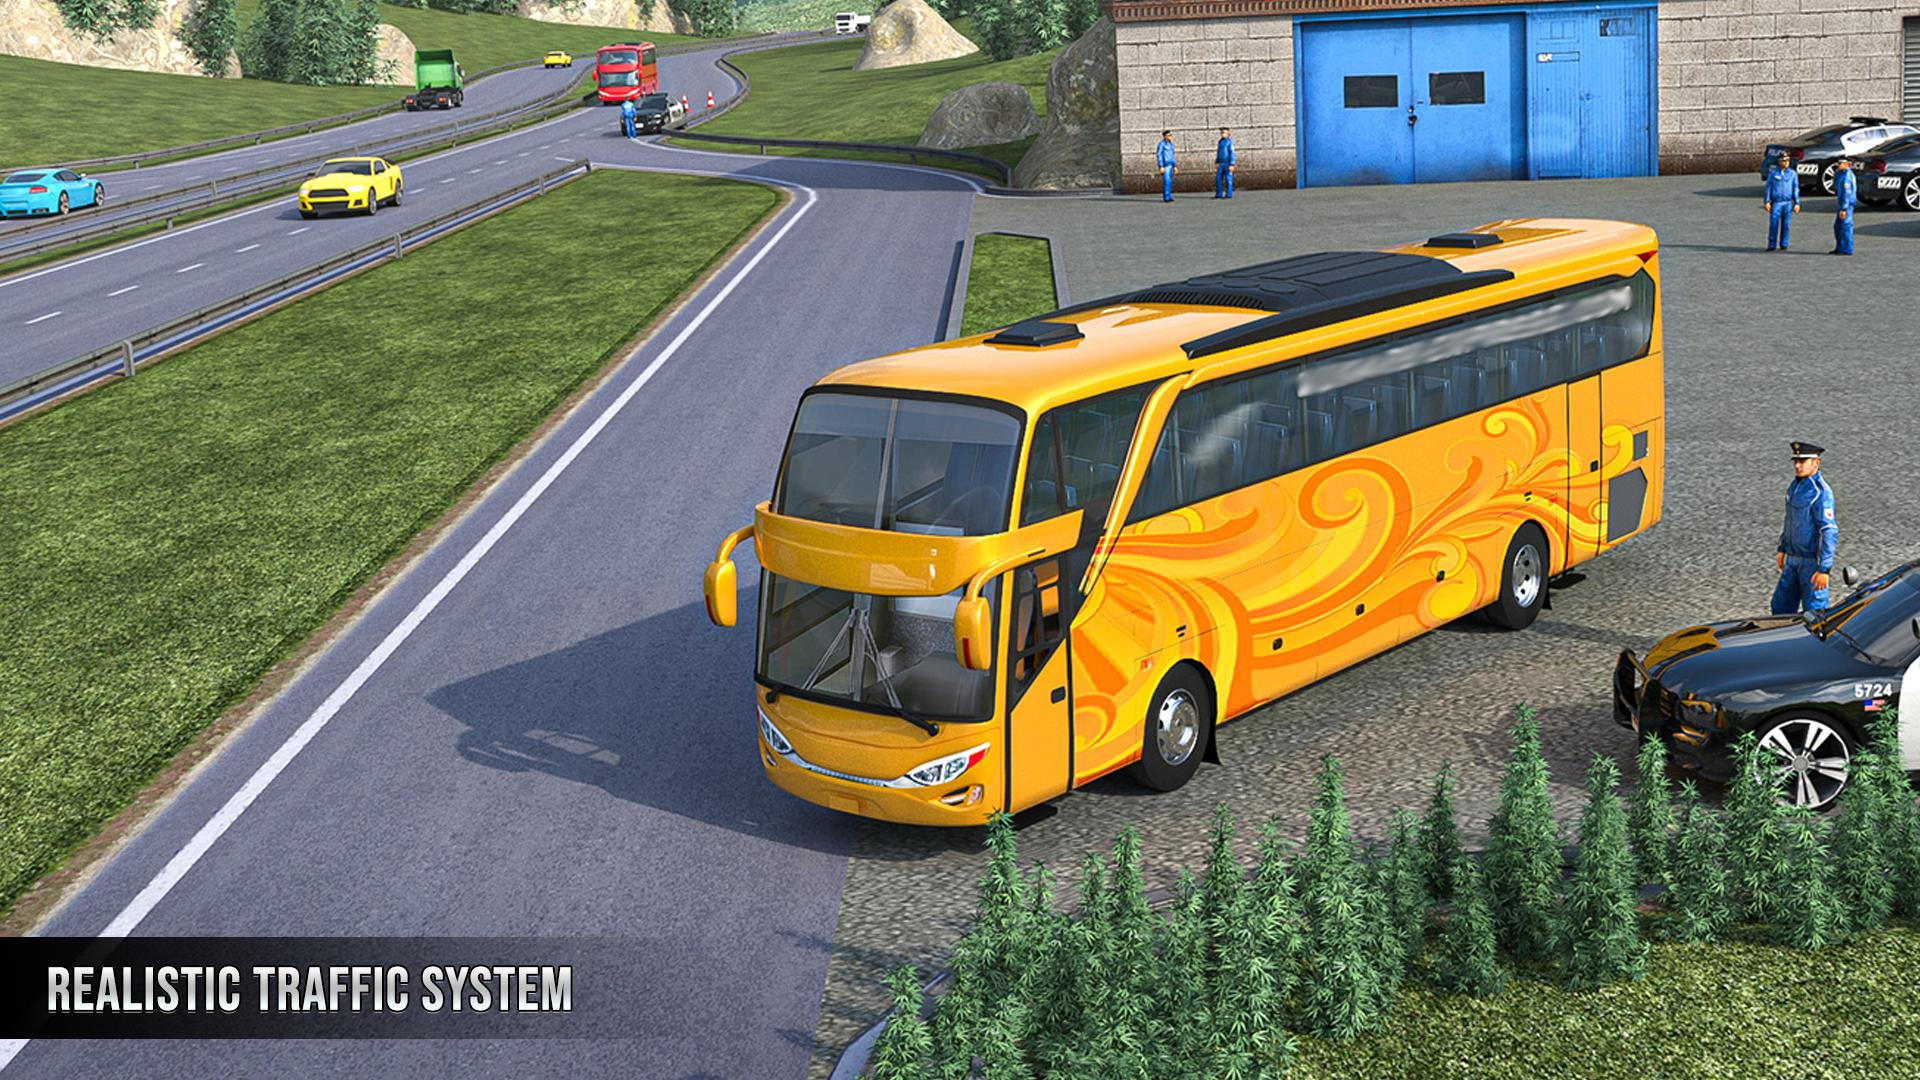 Download Bus Simulator Indonesia for PC and Android for Free